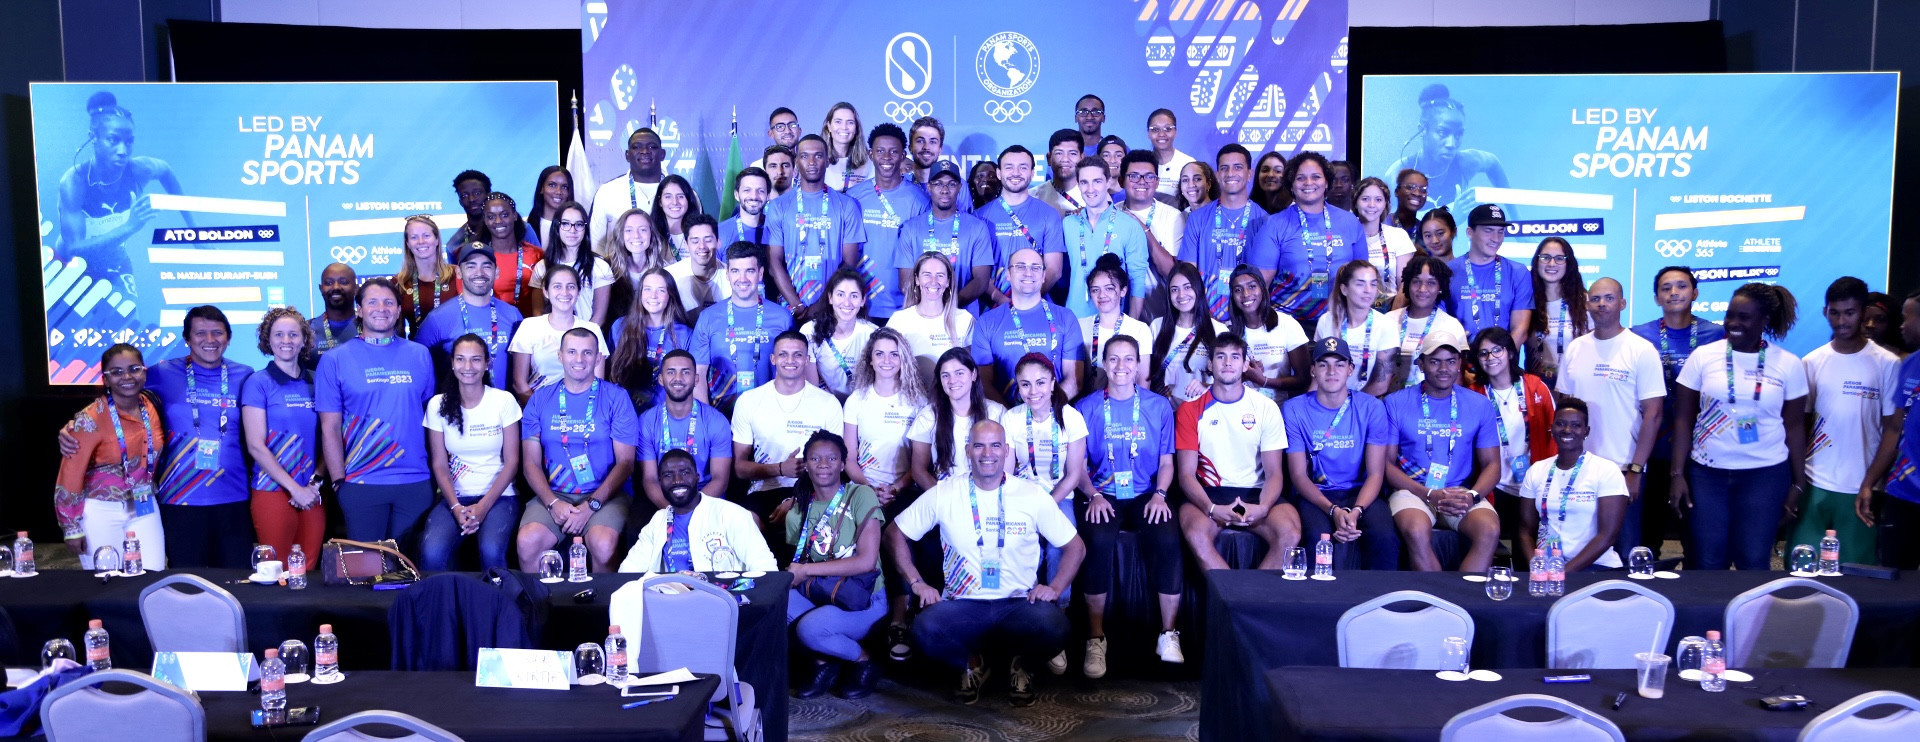 More than 100 representatives attended the Panam Sports Athletes Forum that began in Cancun ©Panam Sports